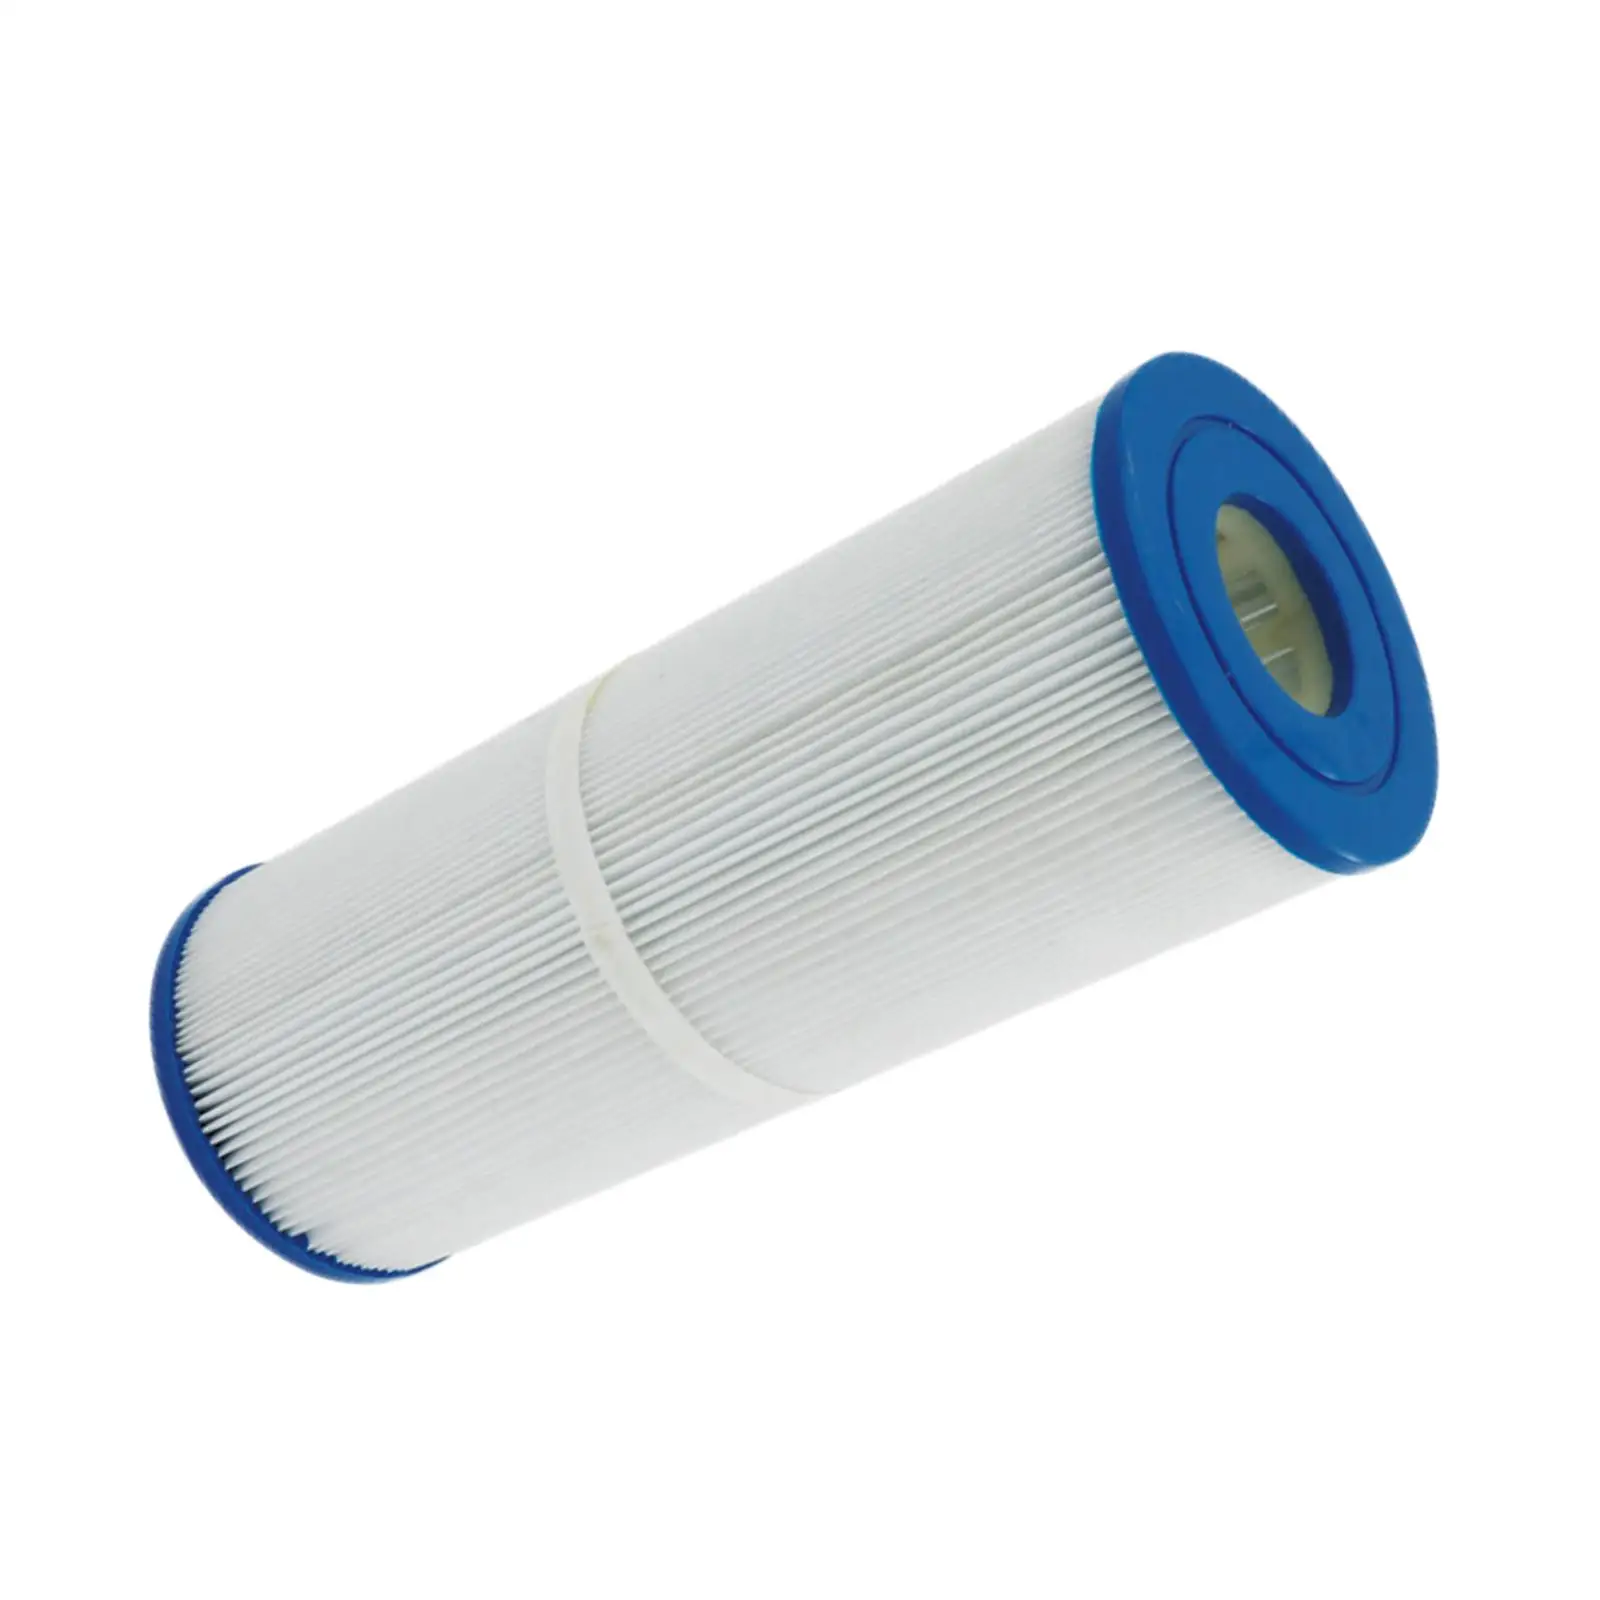 Washable and reusable swimming pool filter pool filter element outdoor hot tub replacement filter folding filter